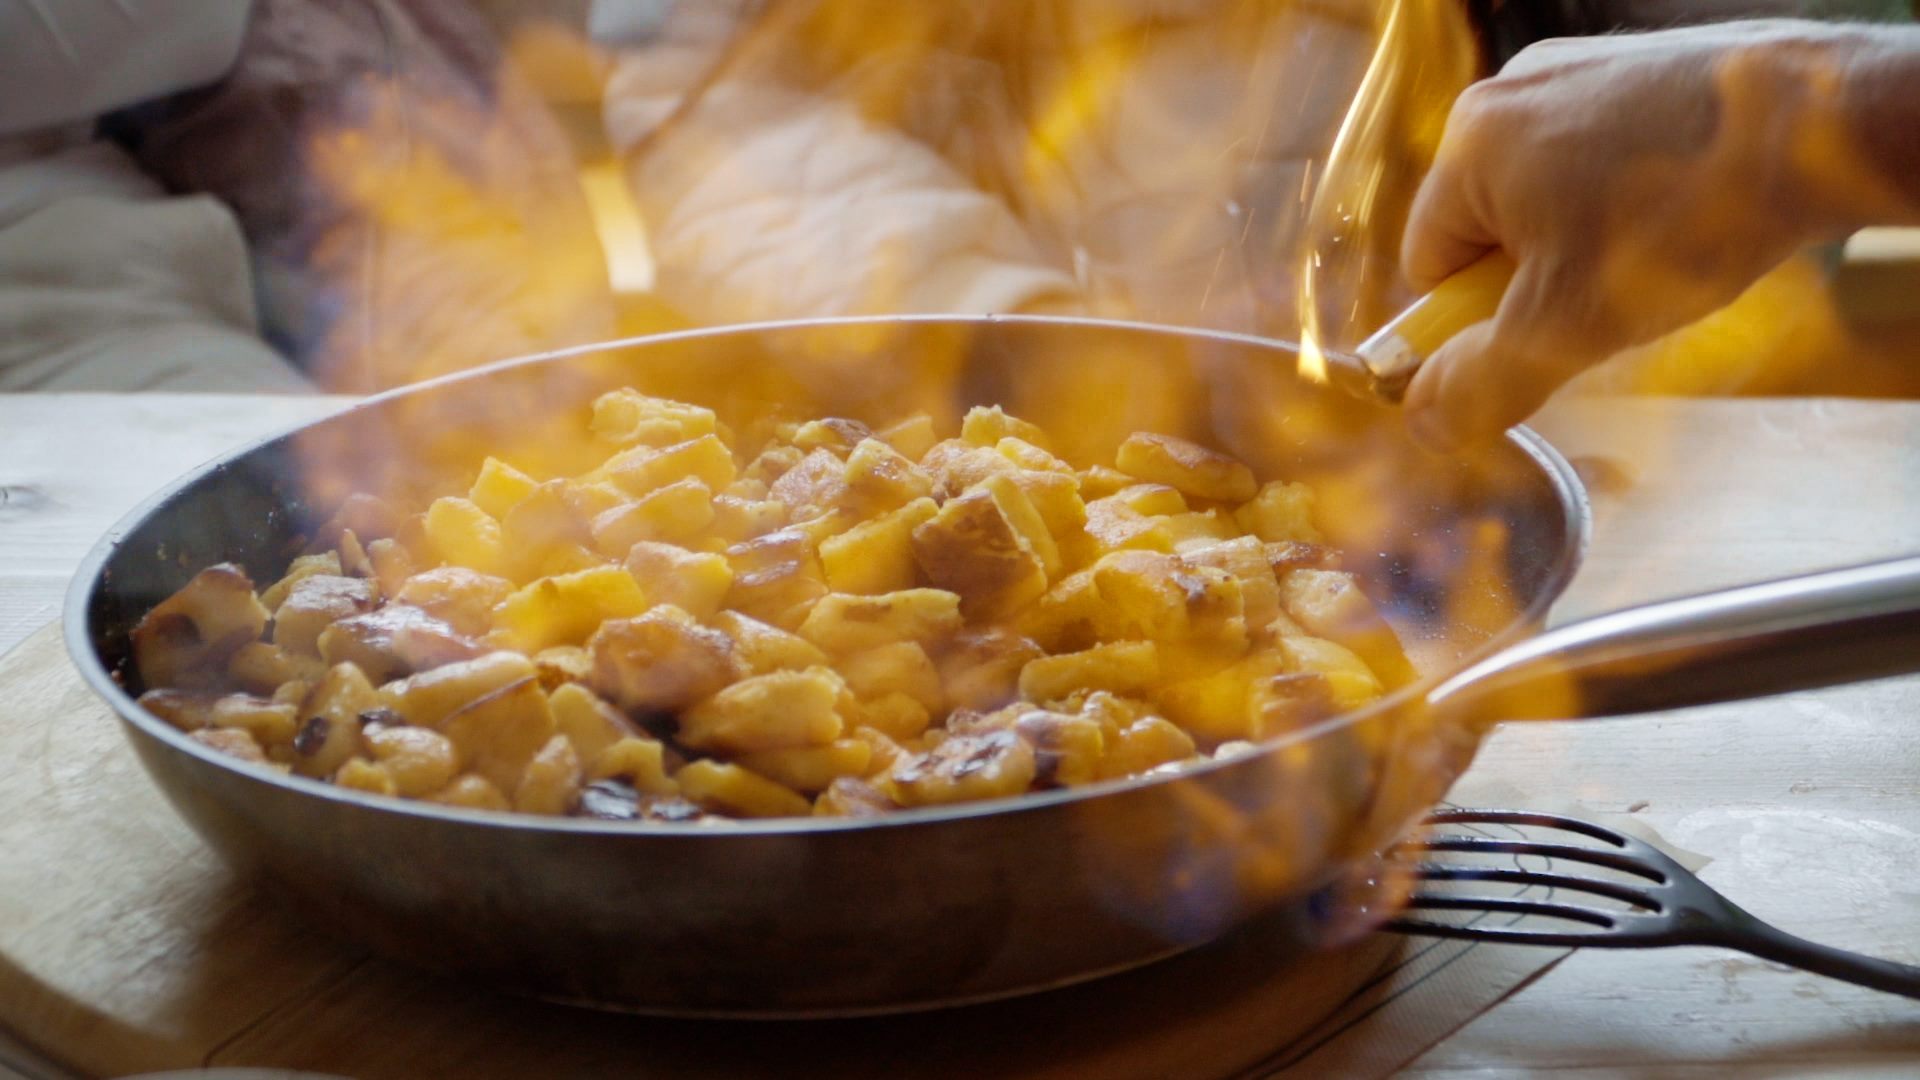 A person is frying potatoes in a pan at a residence in the Alps.